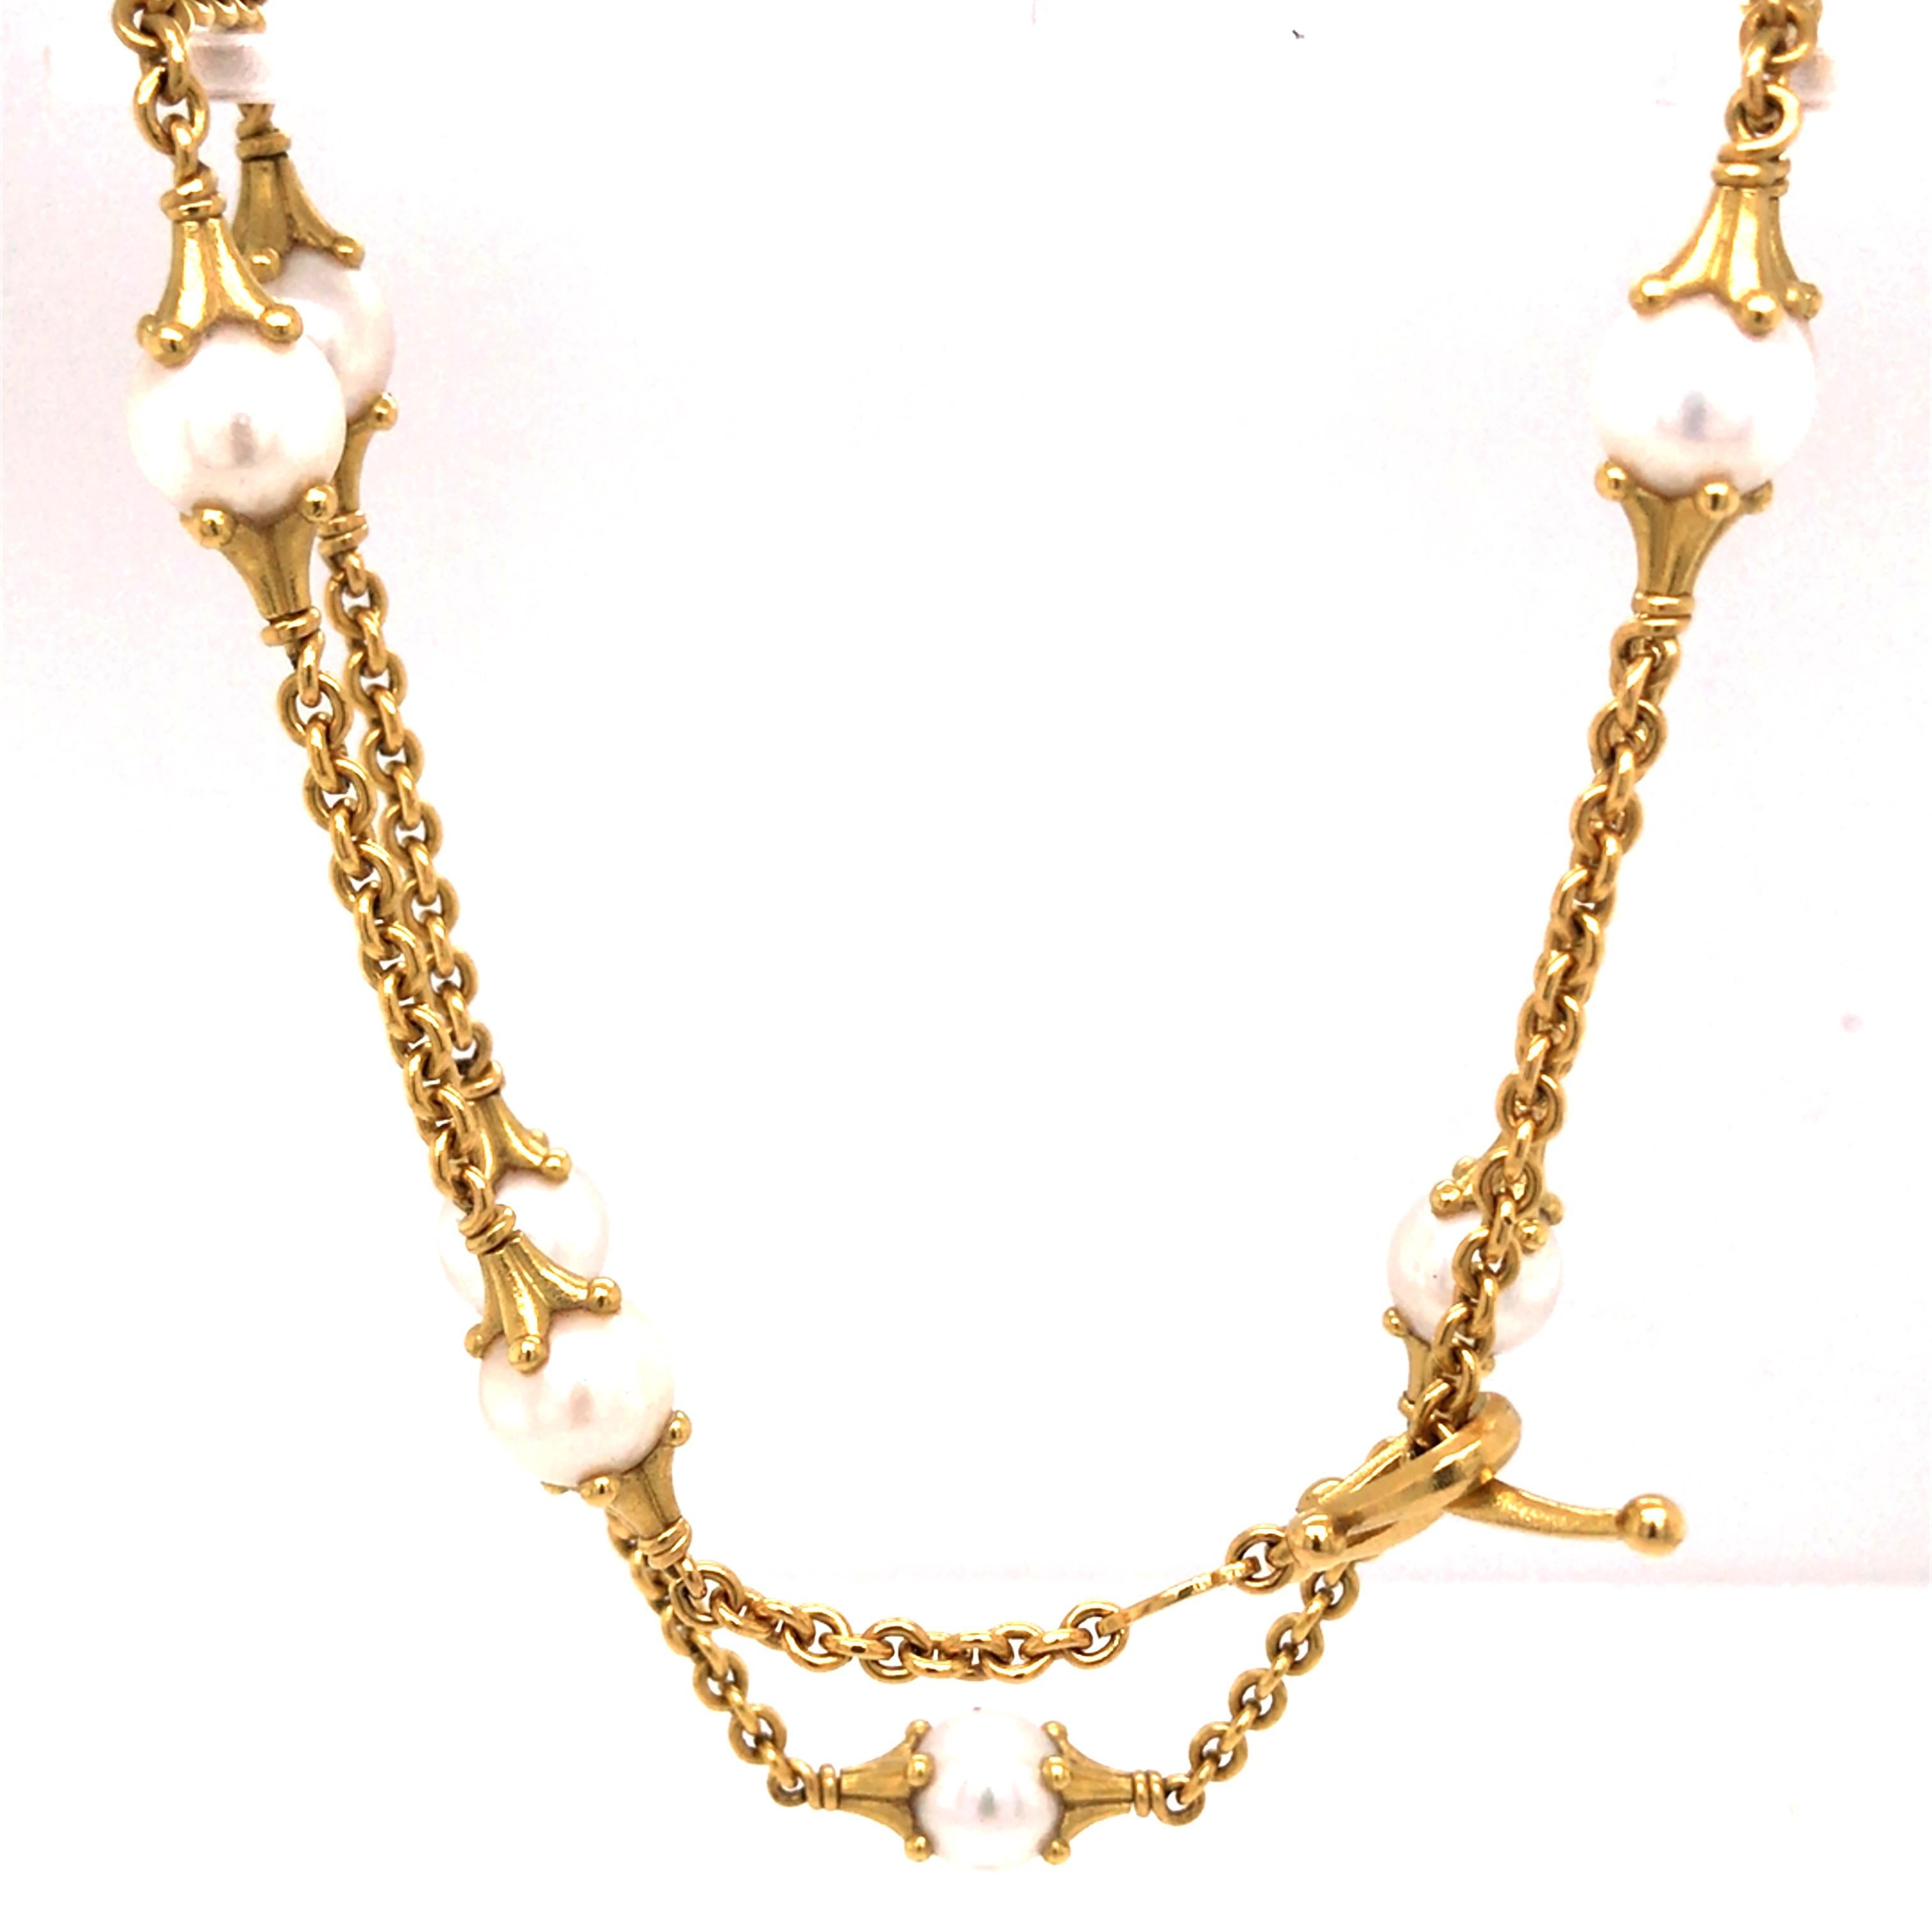 Morelli 18K Yellow Gold Pearl Station Necklace. (8) White Pearls are expertly set. The Necklace measures 16 inch in length. 29.39 grams. Toggle Closure. Signed.